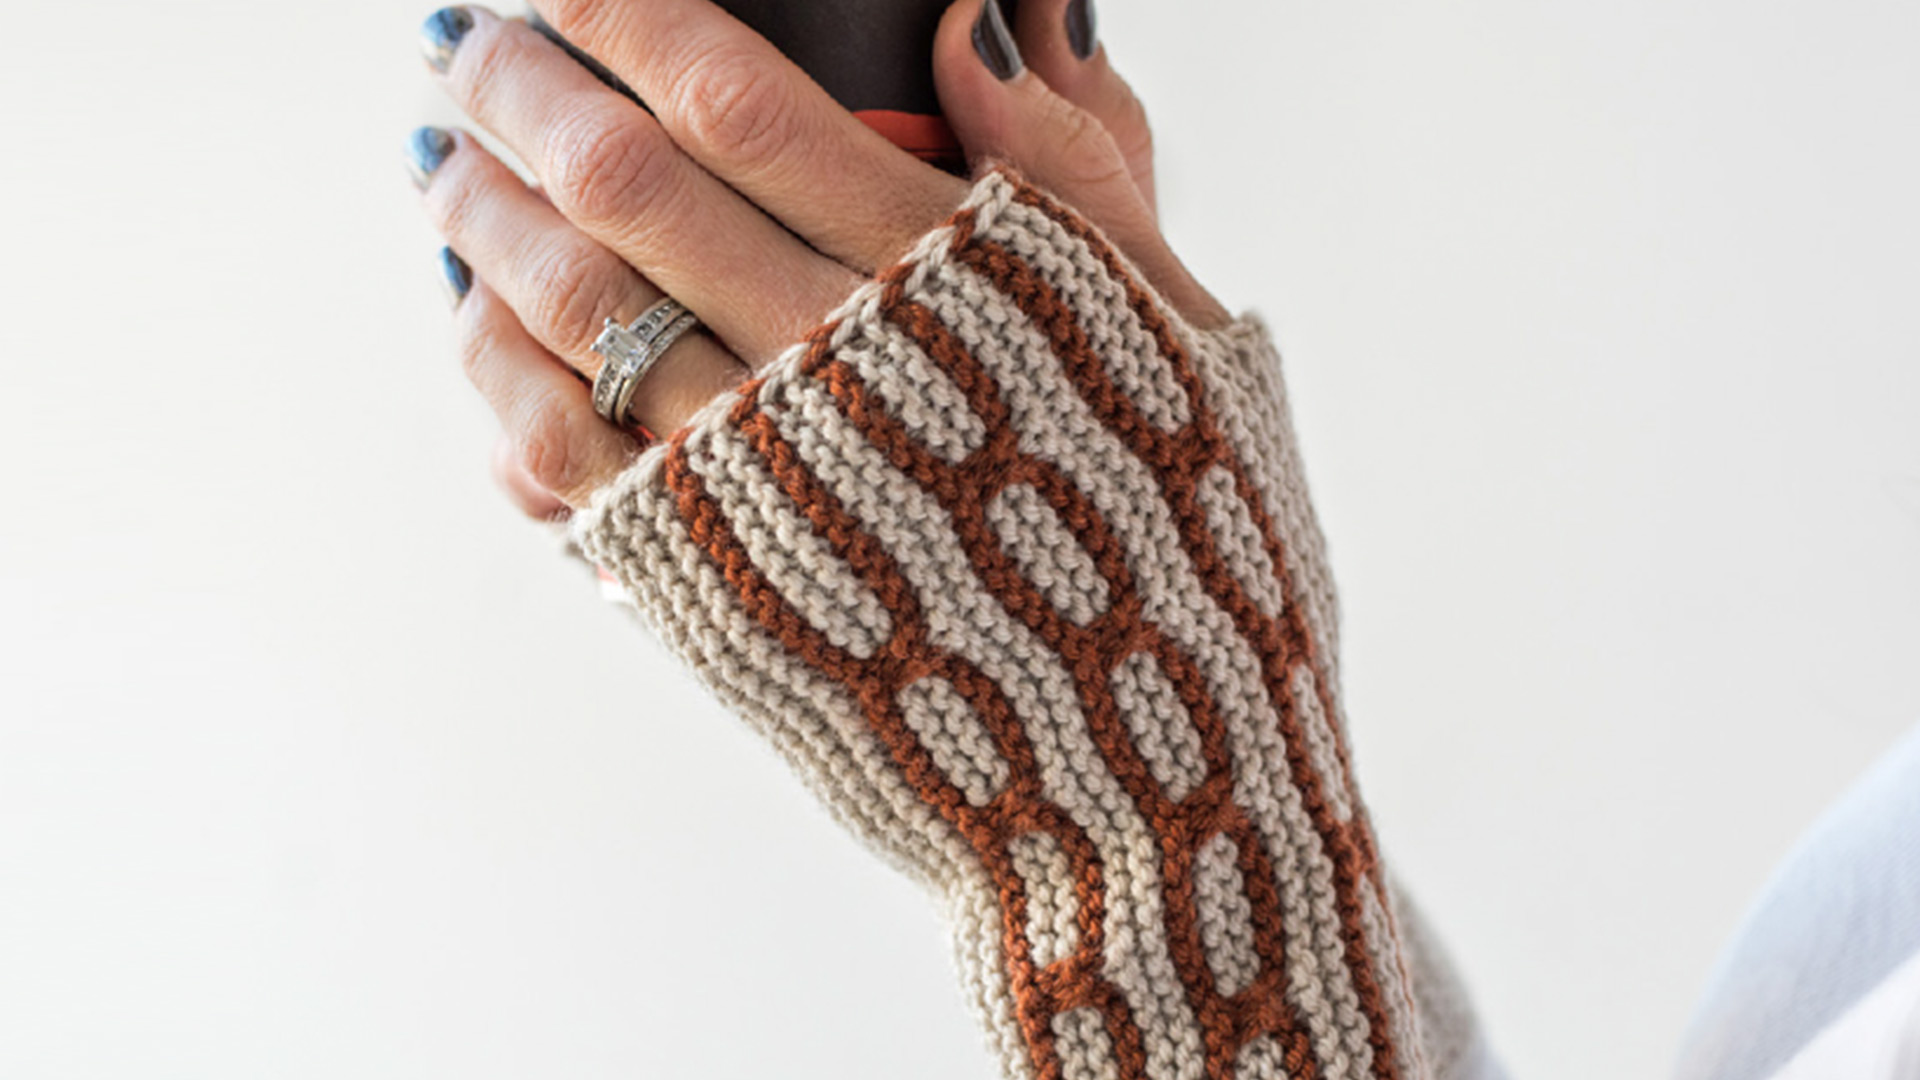 Garter Stitch Mitts | Lorilee Beltmanproduct featured image thumbnail.